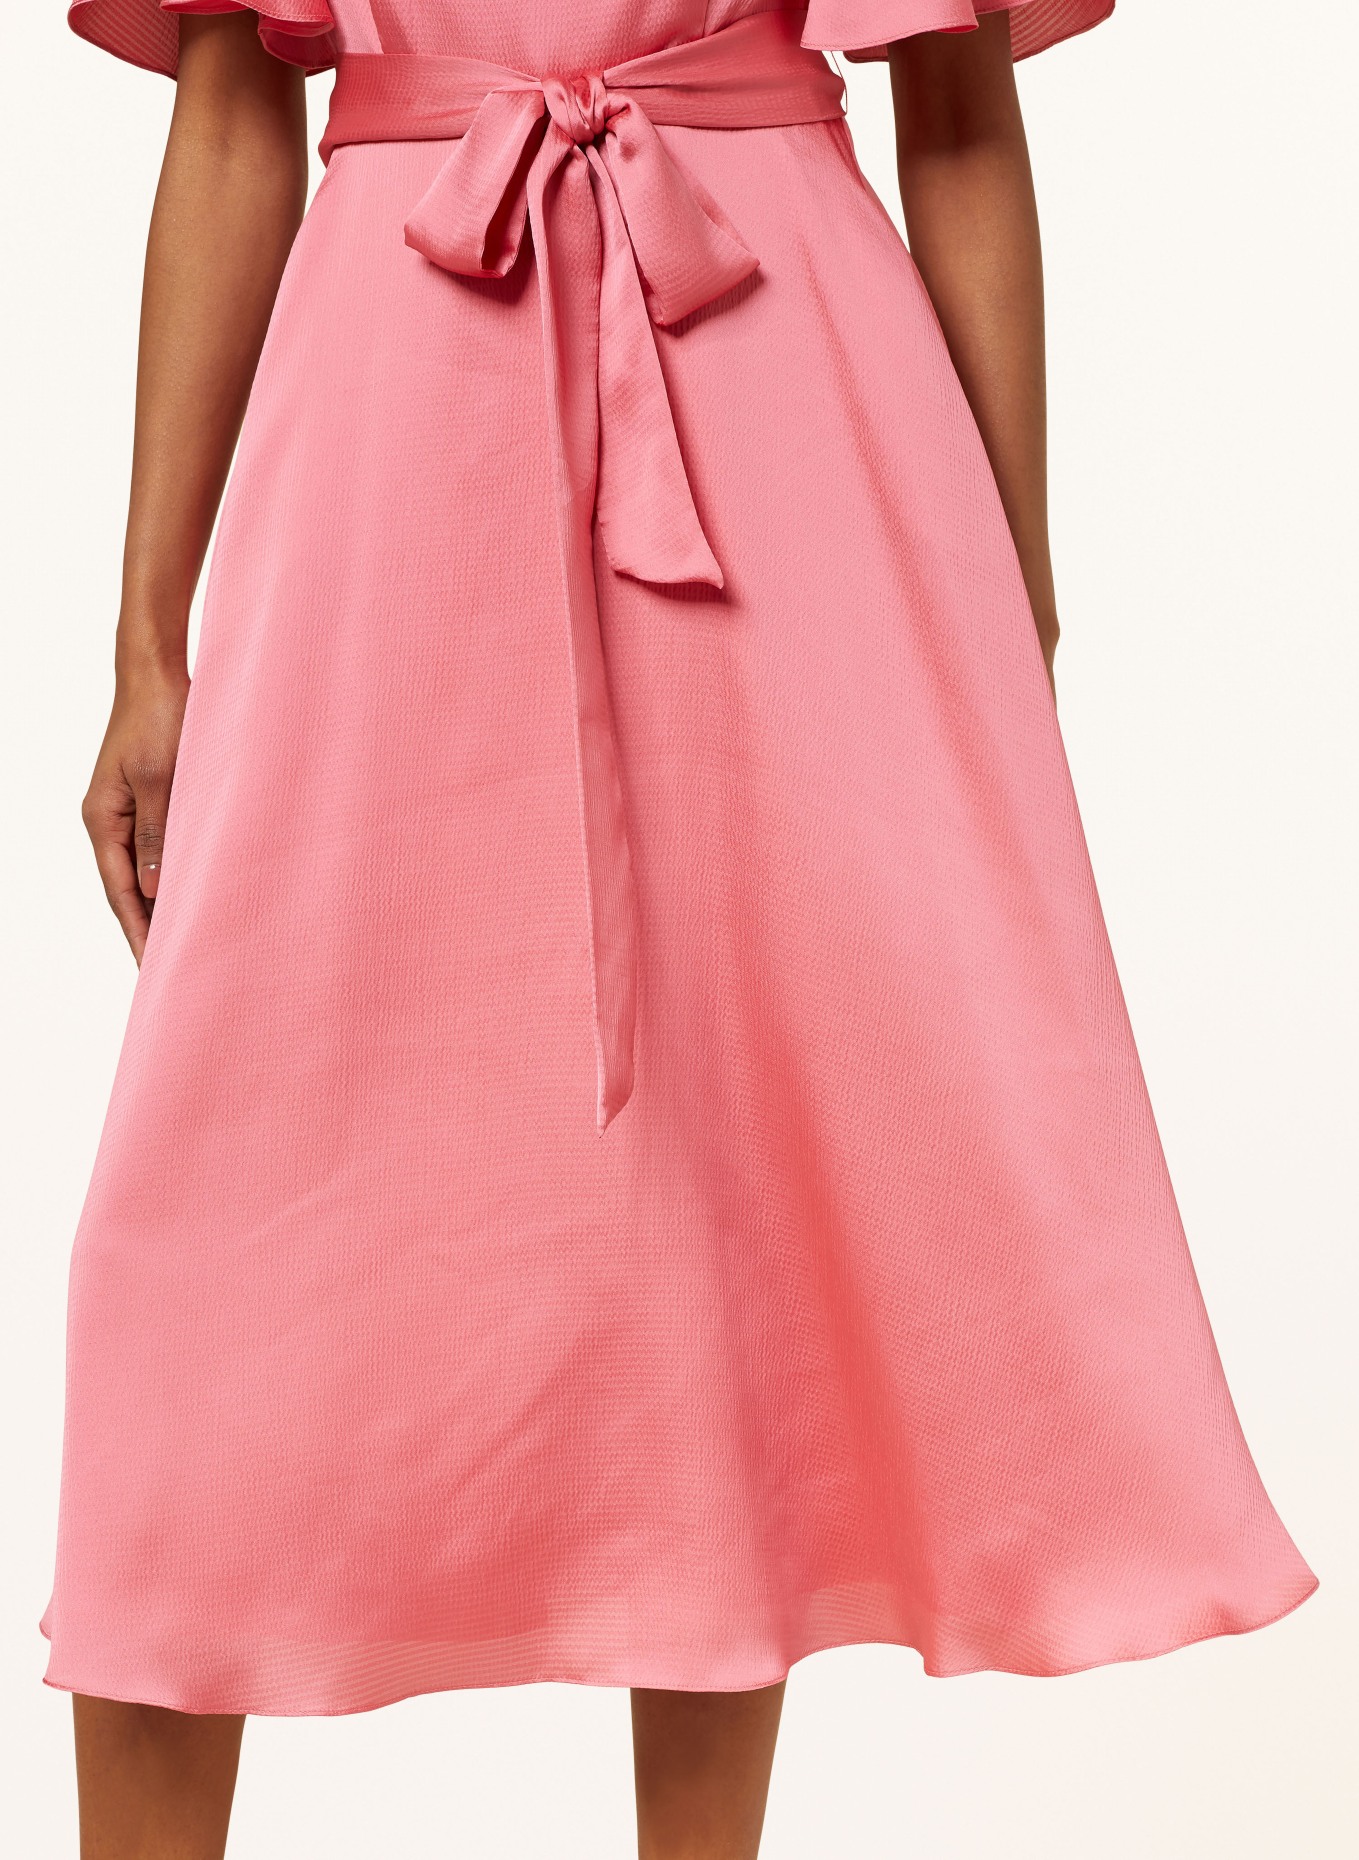 SWING Cocktail dress made of satin, Color: PINK (Image 4)